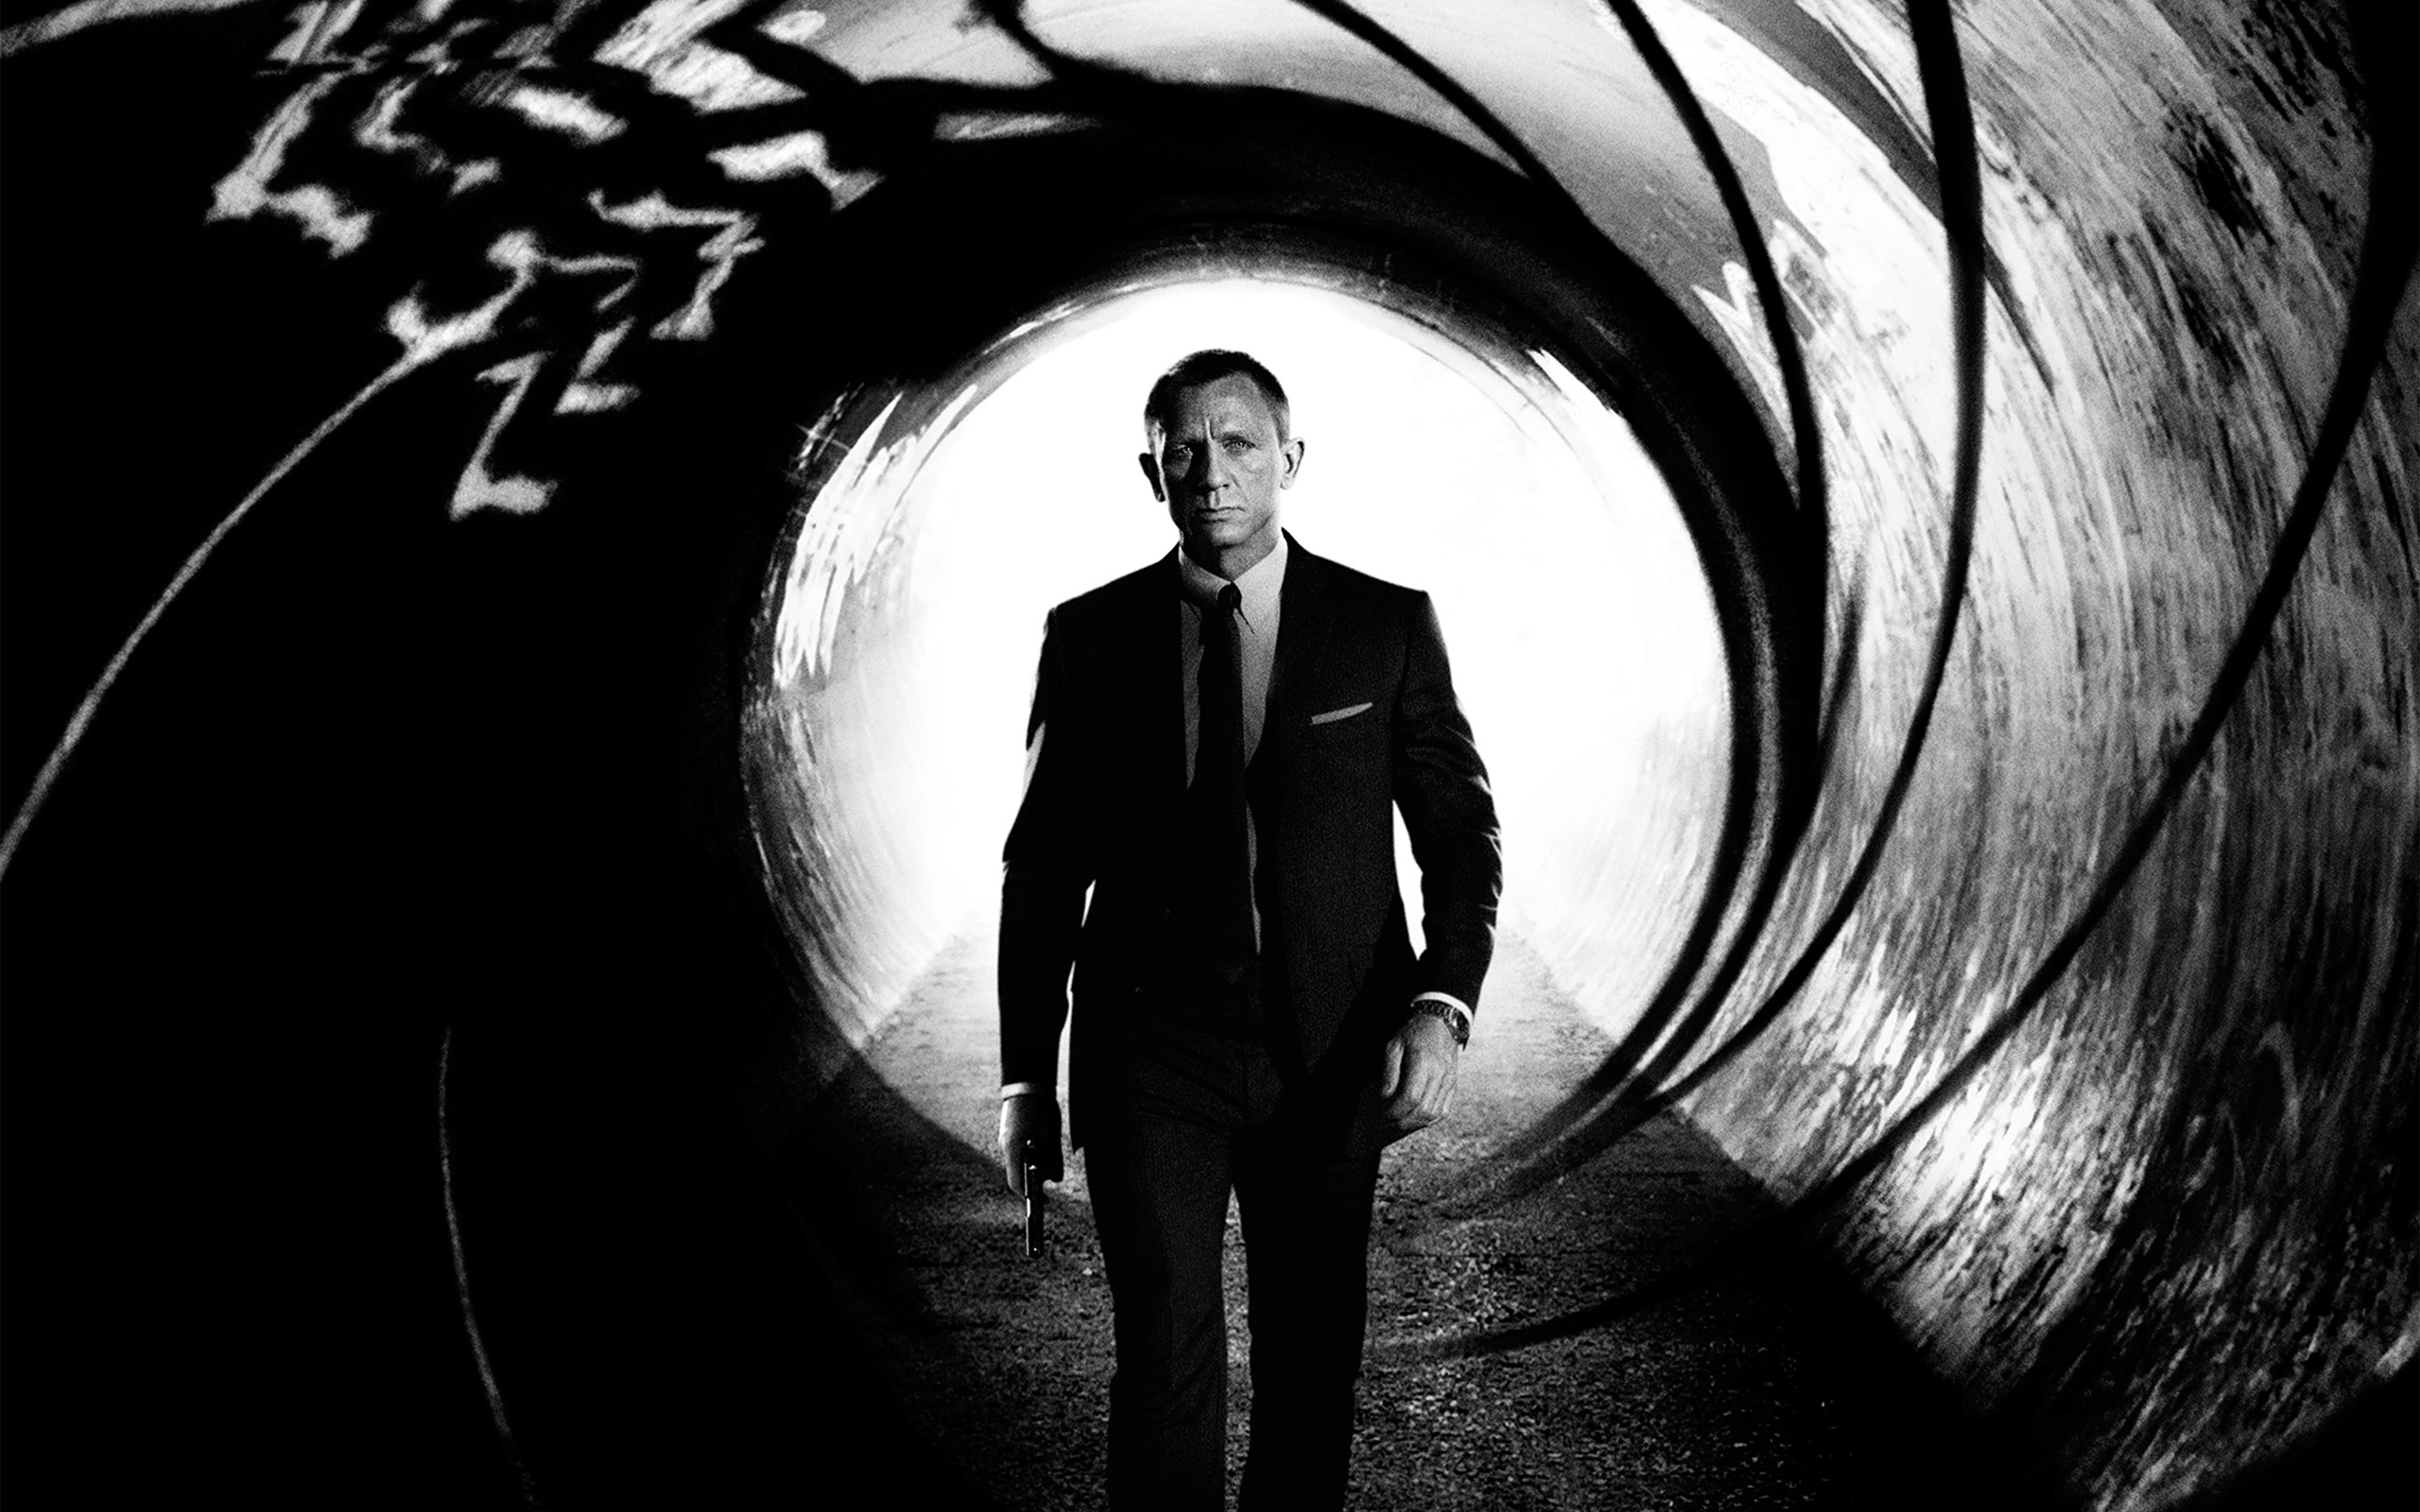 Skyfall: Daniel Craig, A British actor who gained international fame by playing the fictional secret agent James Bond. 2560x1600 HD Background.